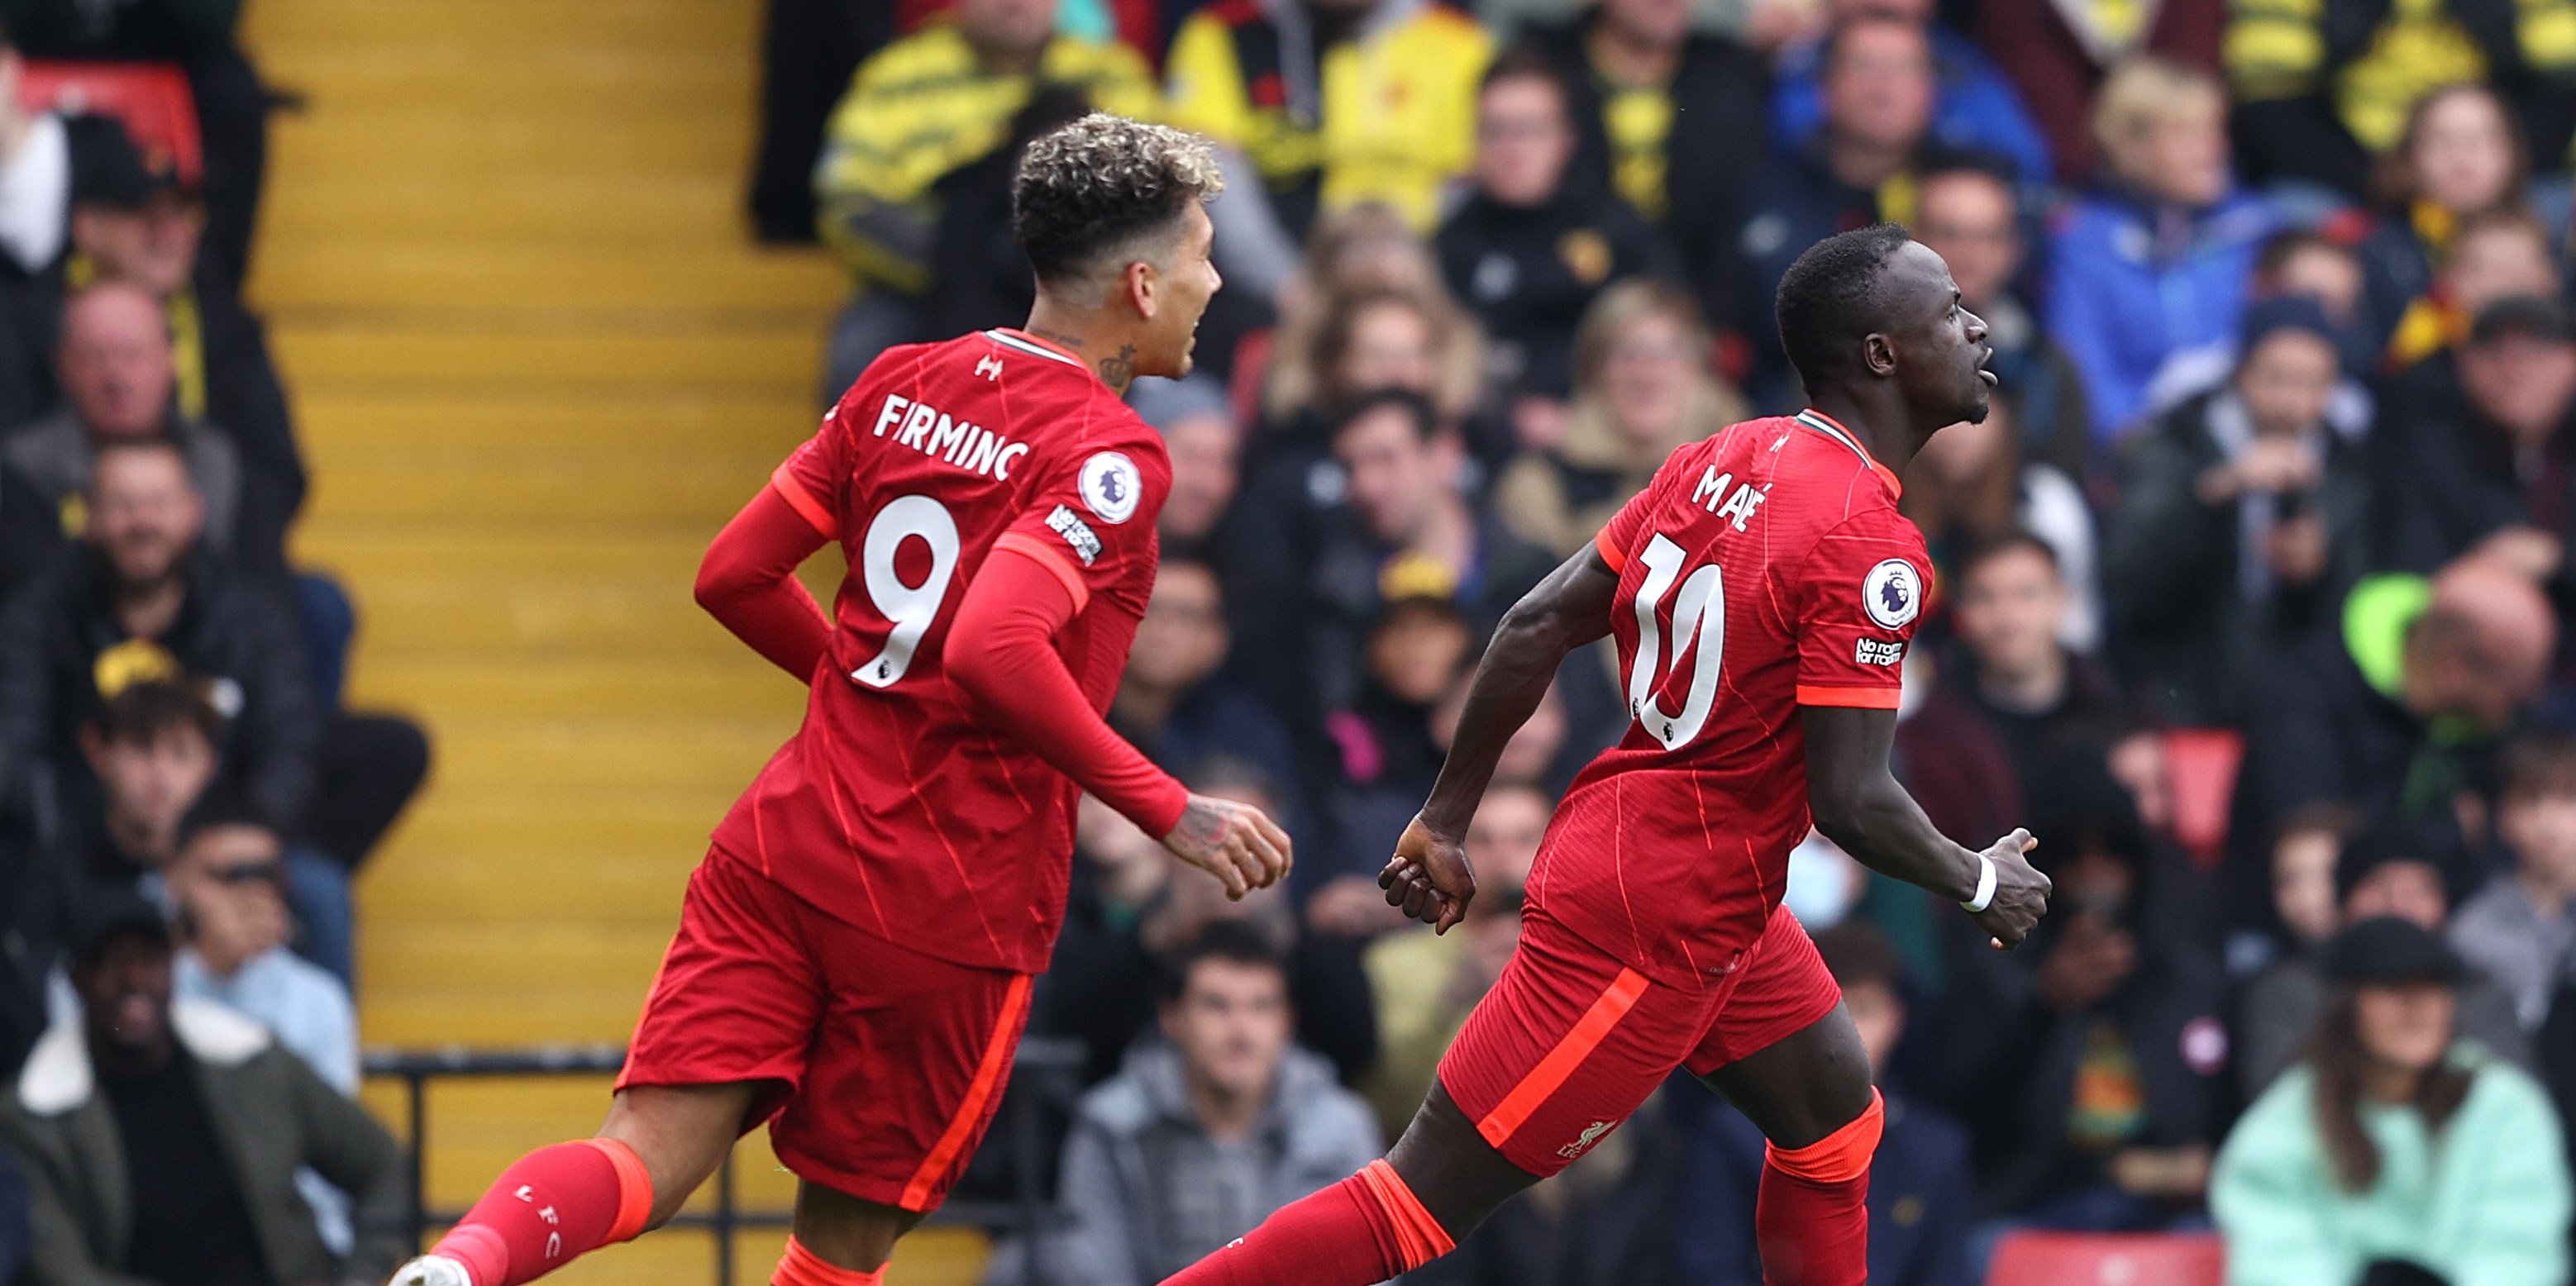 Liverpool’s contract plans with Firmino & Mane suggested by club correspondent as Reds could be set for busy summer window